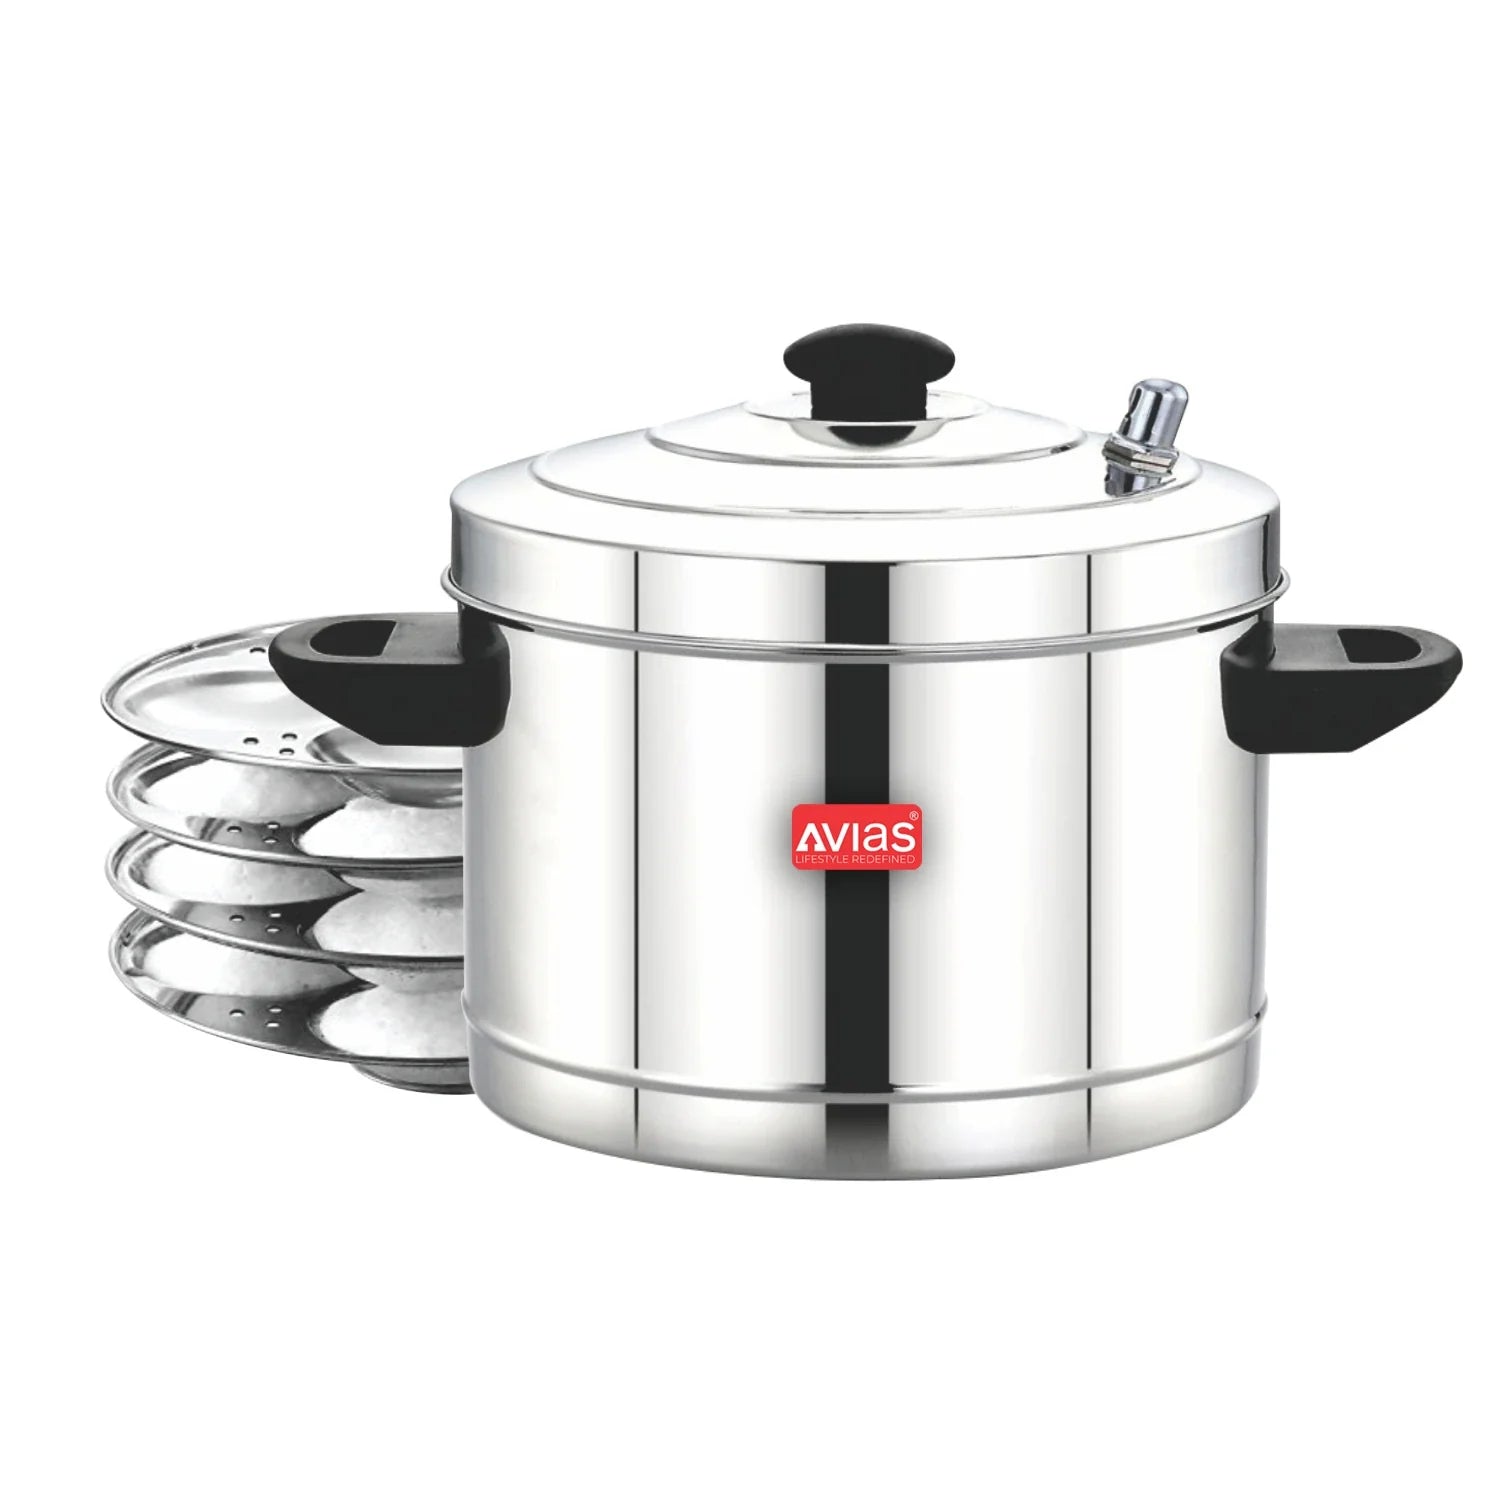 AVIAS stainless steel Idly cooker/ idly maker/ idly pot with Bakelite handles